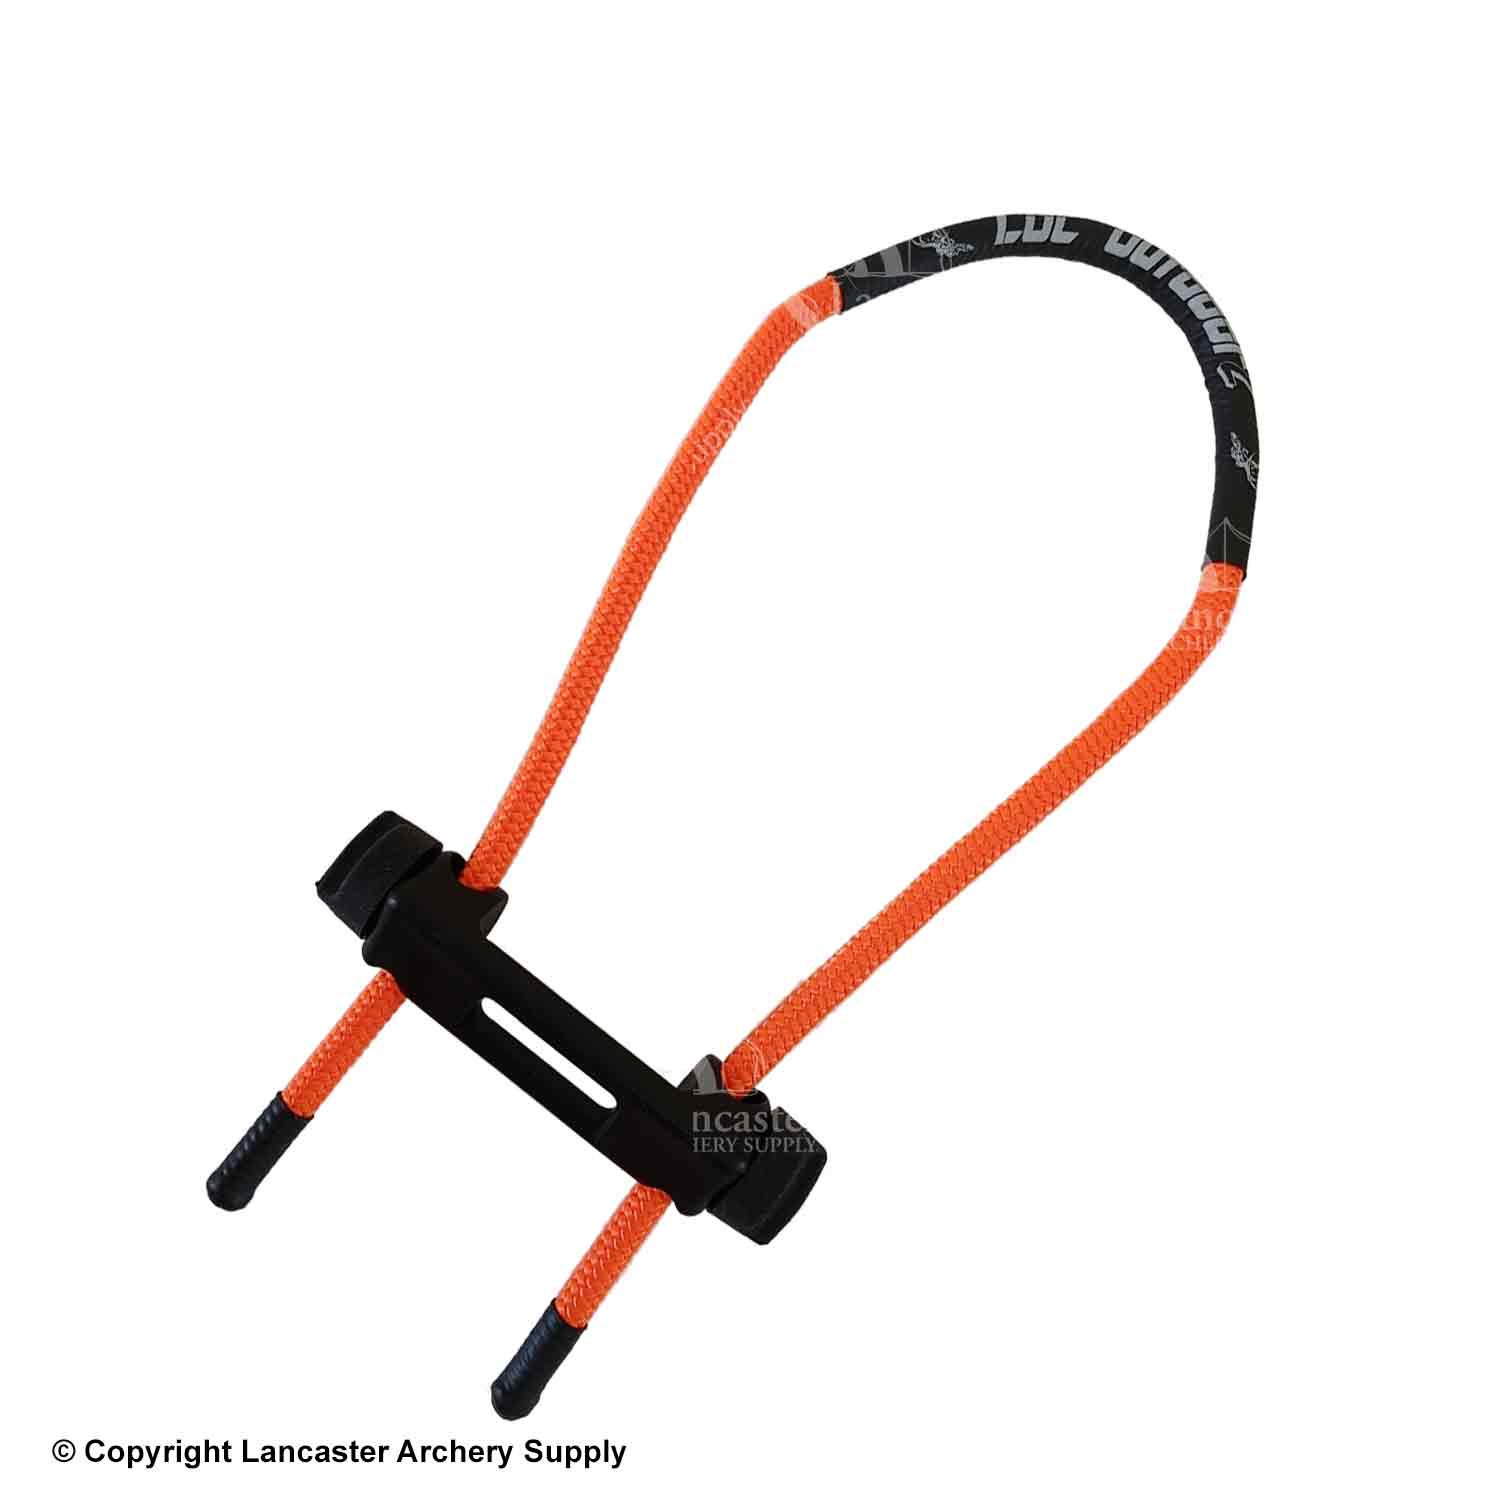 LOC Outdoorz Carbon Hunt'R Bow Sling